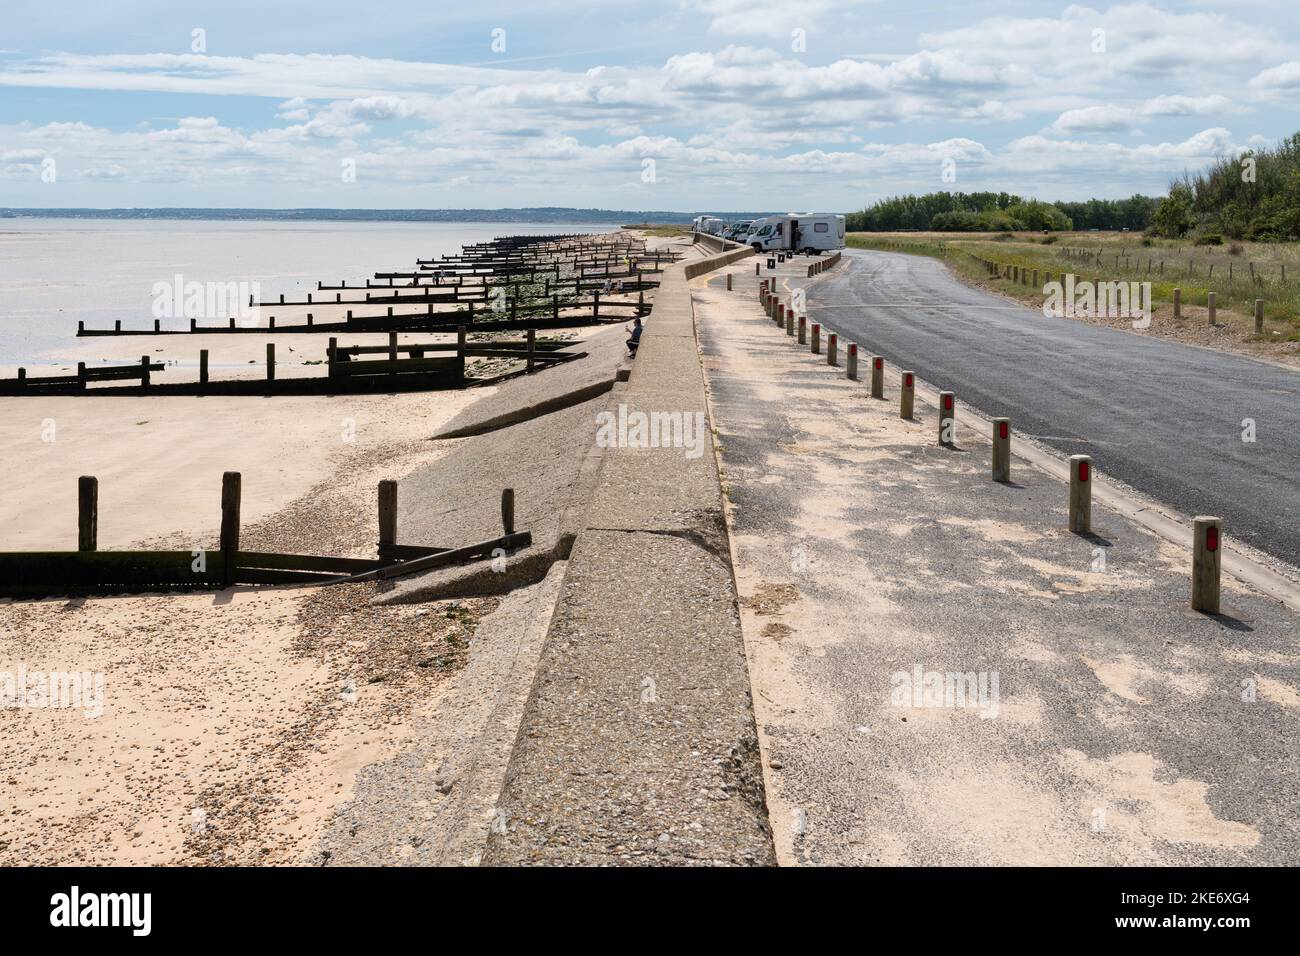 Limited parking for larger vehicles following installation of bollards along the seafront, Leysdown on Sea, Isle of Sheppey, Kent, England, UK Stock Photo